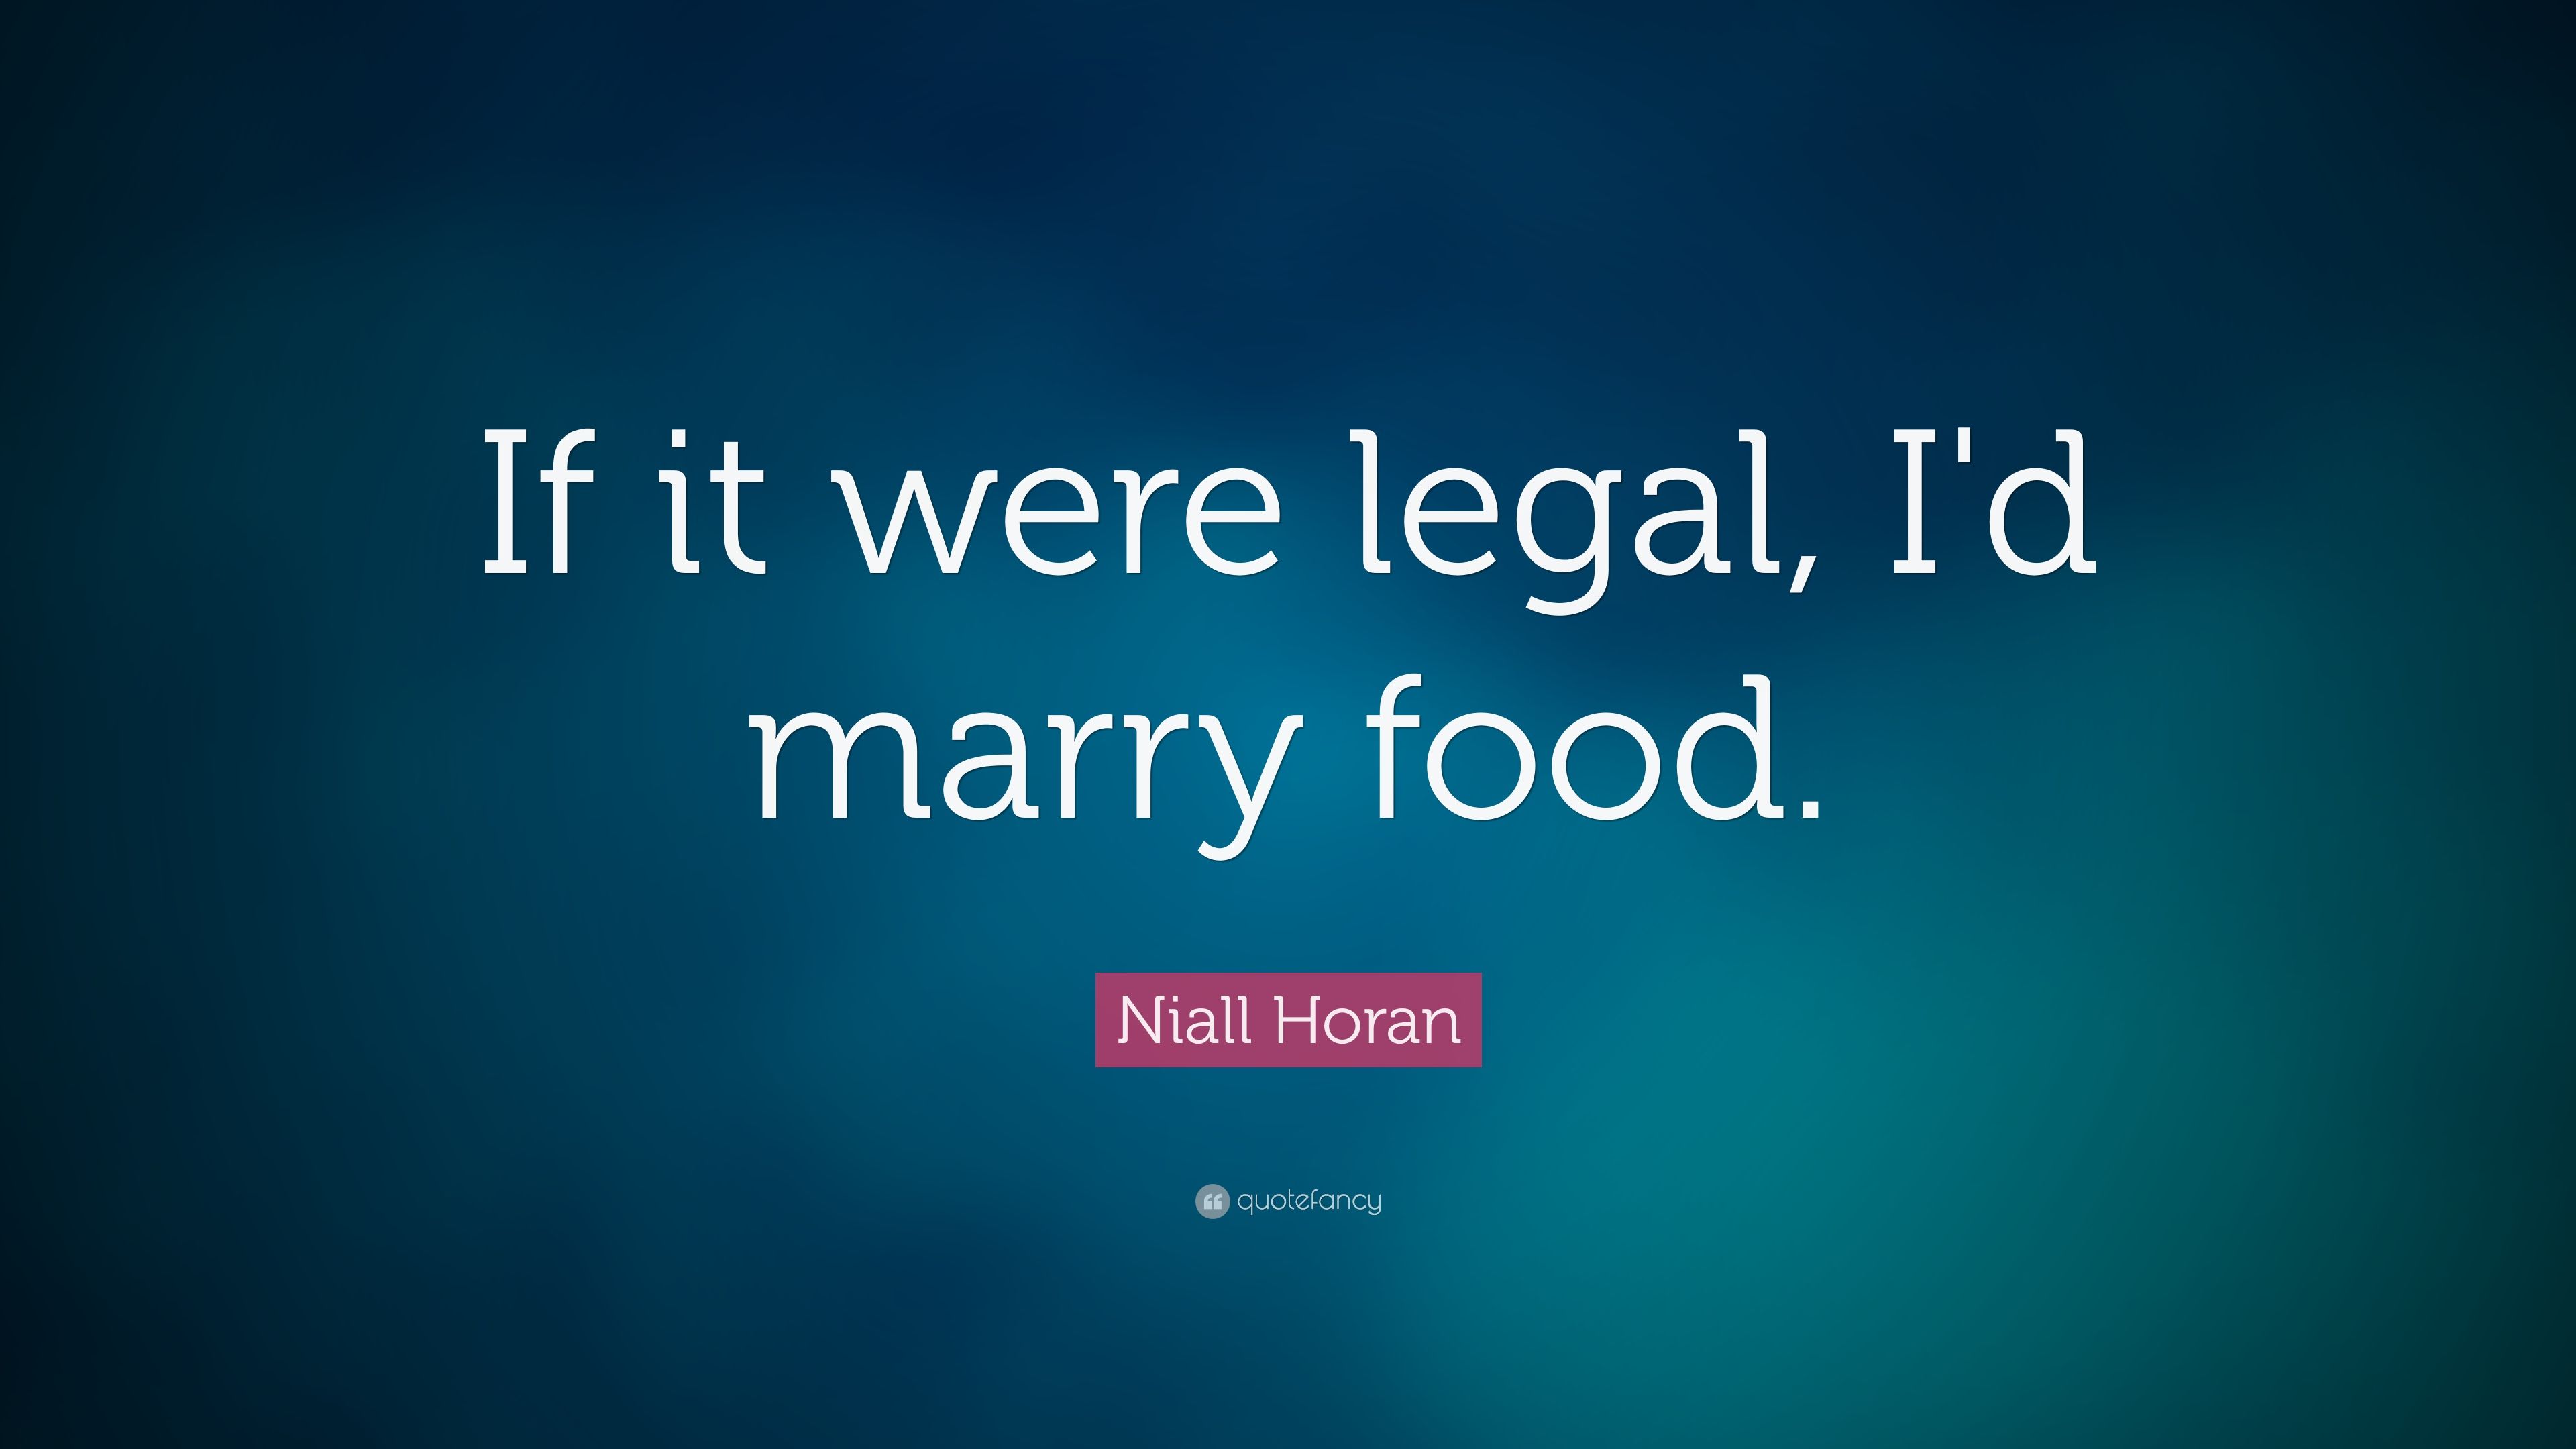 Niall Horan Quote: “If it were legal, I'd marry food. ” (15 wallpaper)